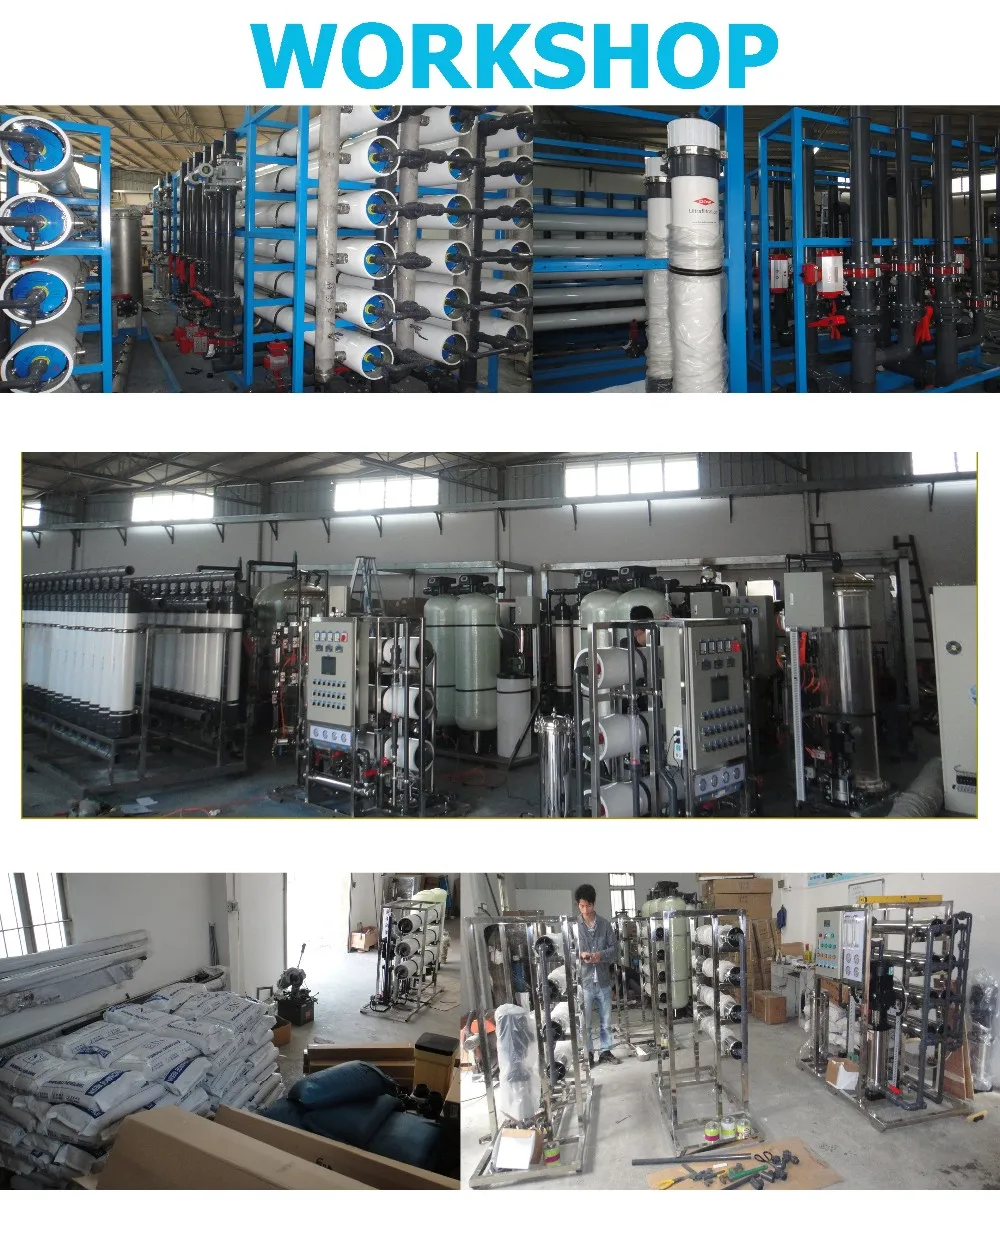 1000LPH  waste water treatment equipment industrial water purification systems